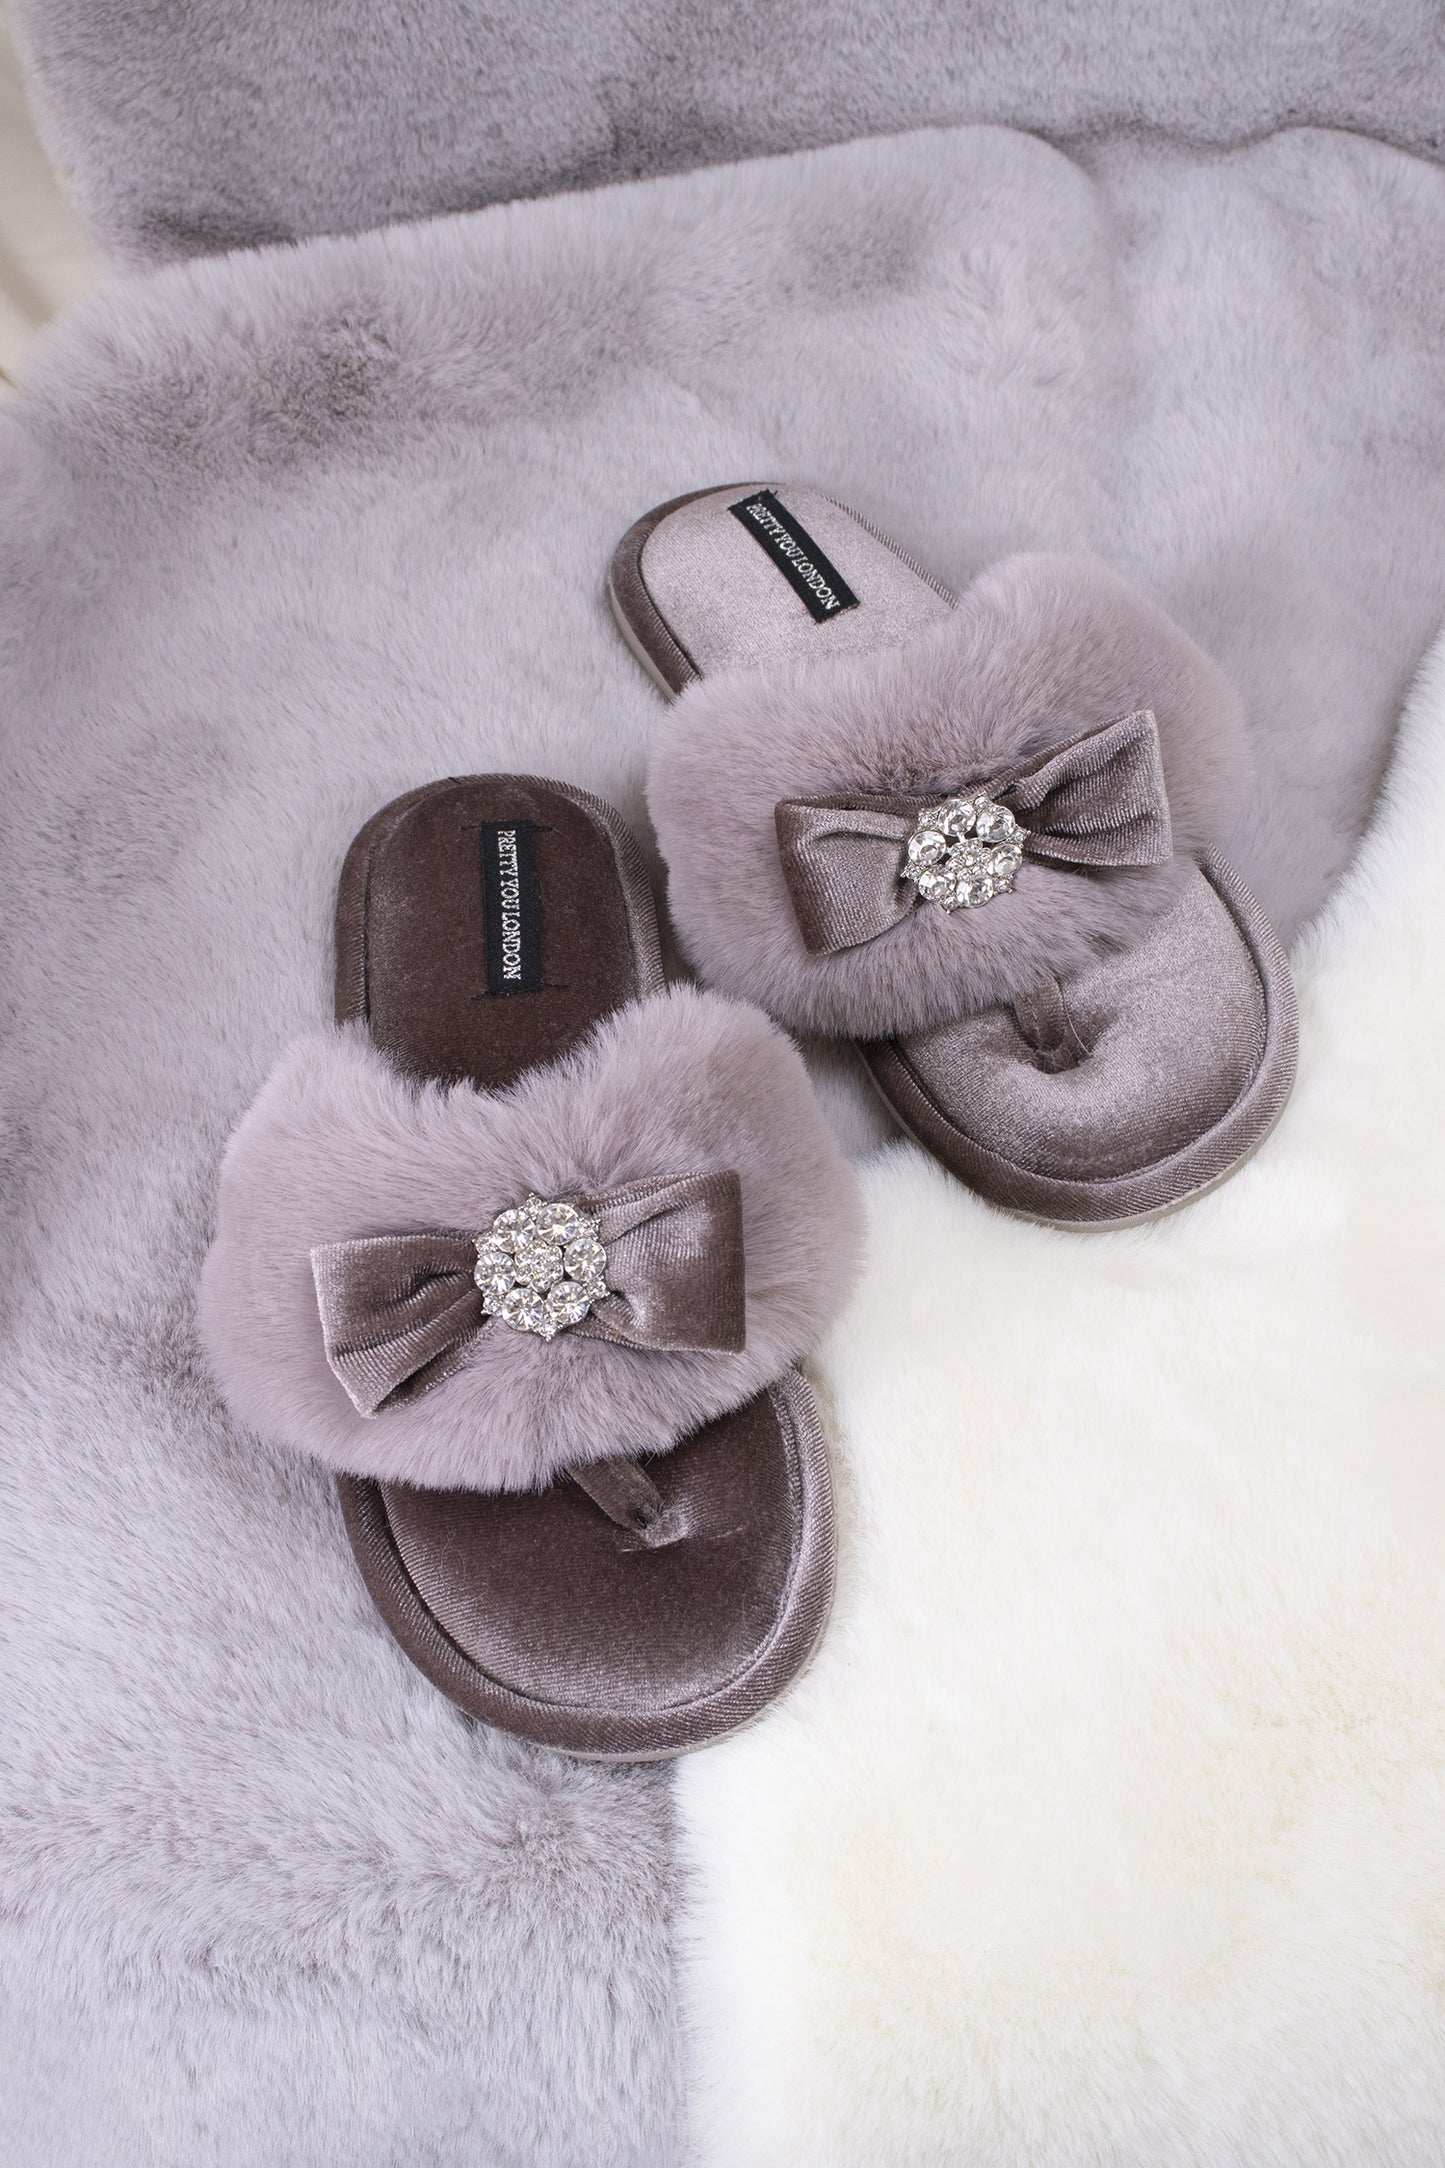 Amelie women's toe post slippers in mink with a premium velvet bow and diamante embellishment atop a plush faux fur band from Pretty You London